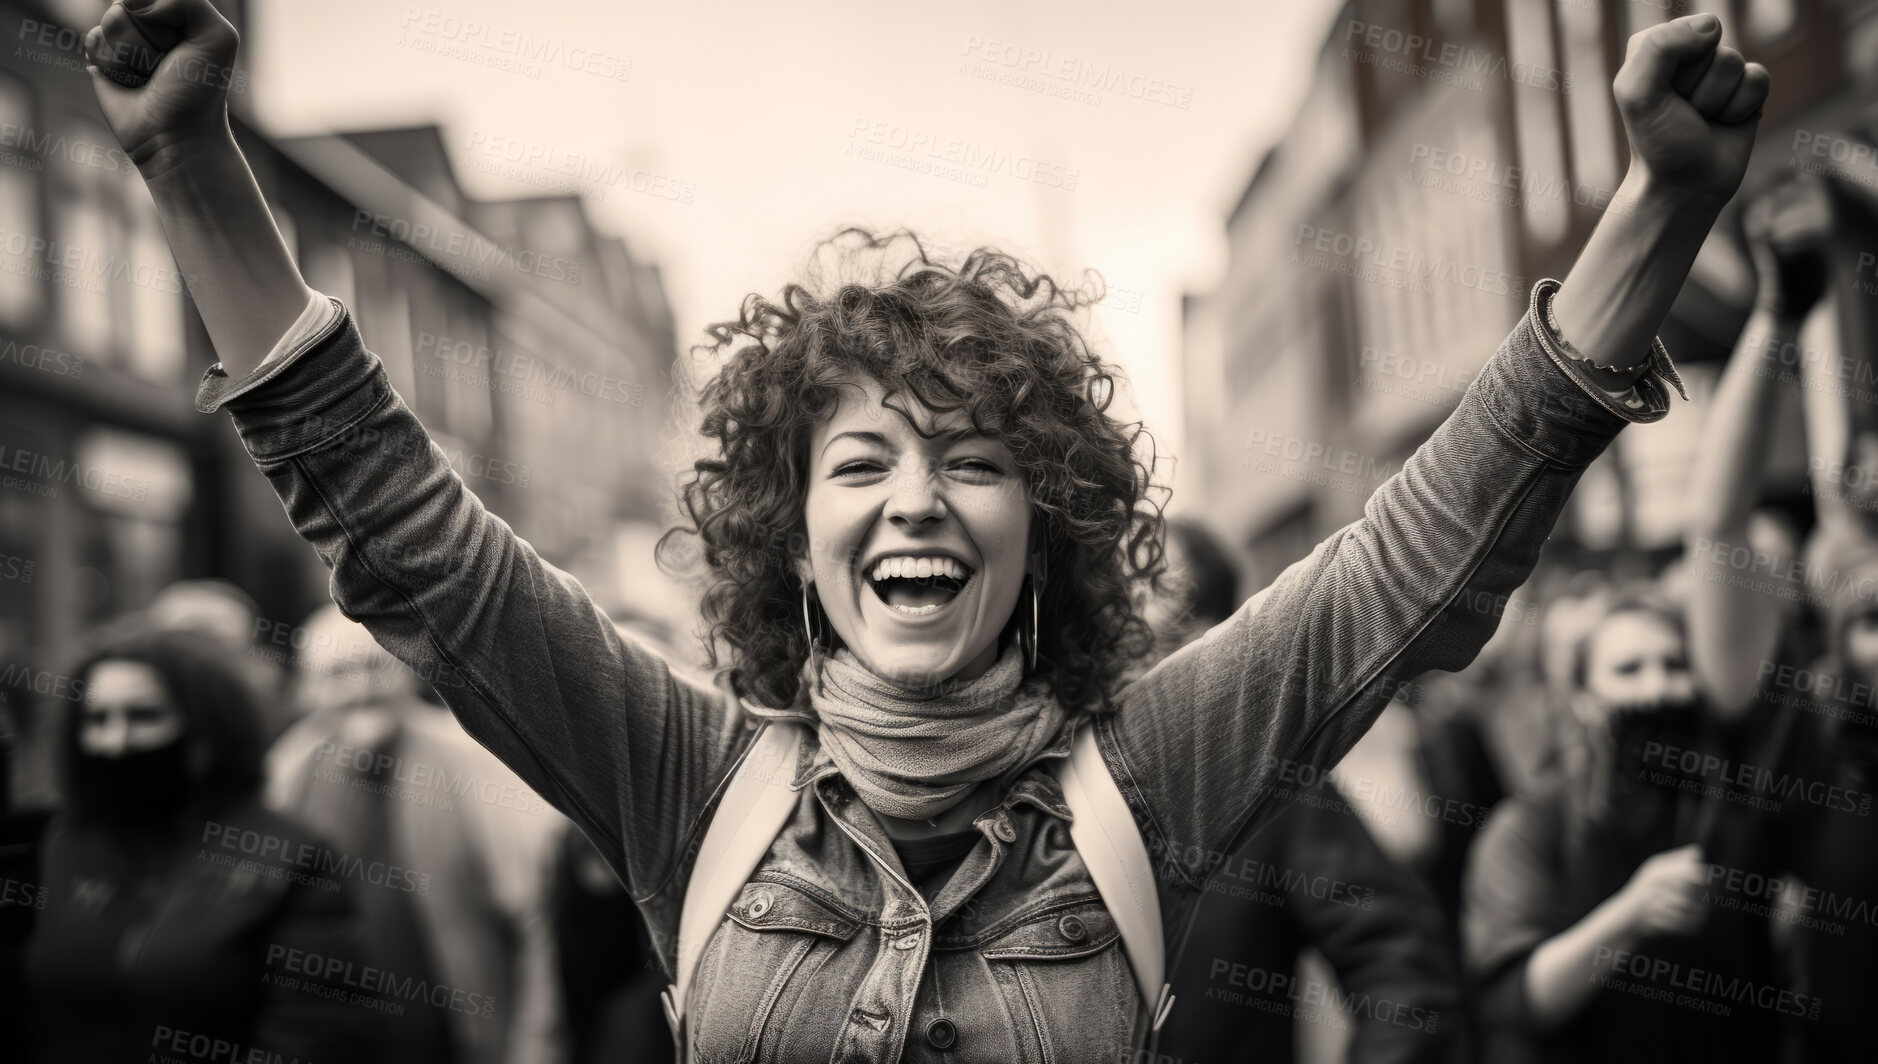 Buy stock photo Happy woman protester raising fist in crowd. Human rights. Activism concept.